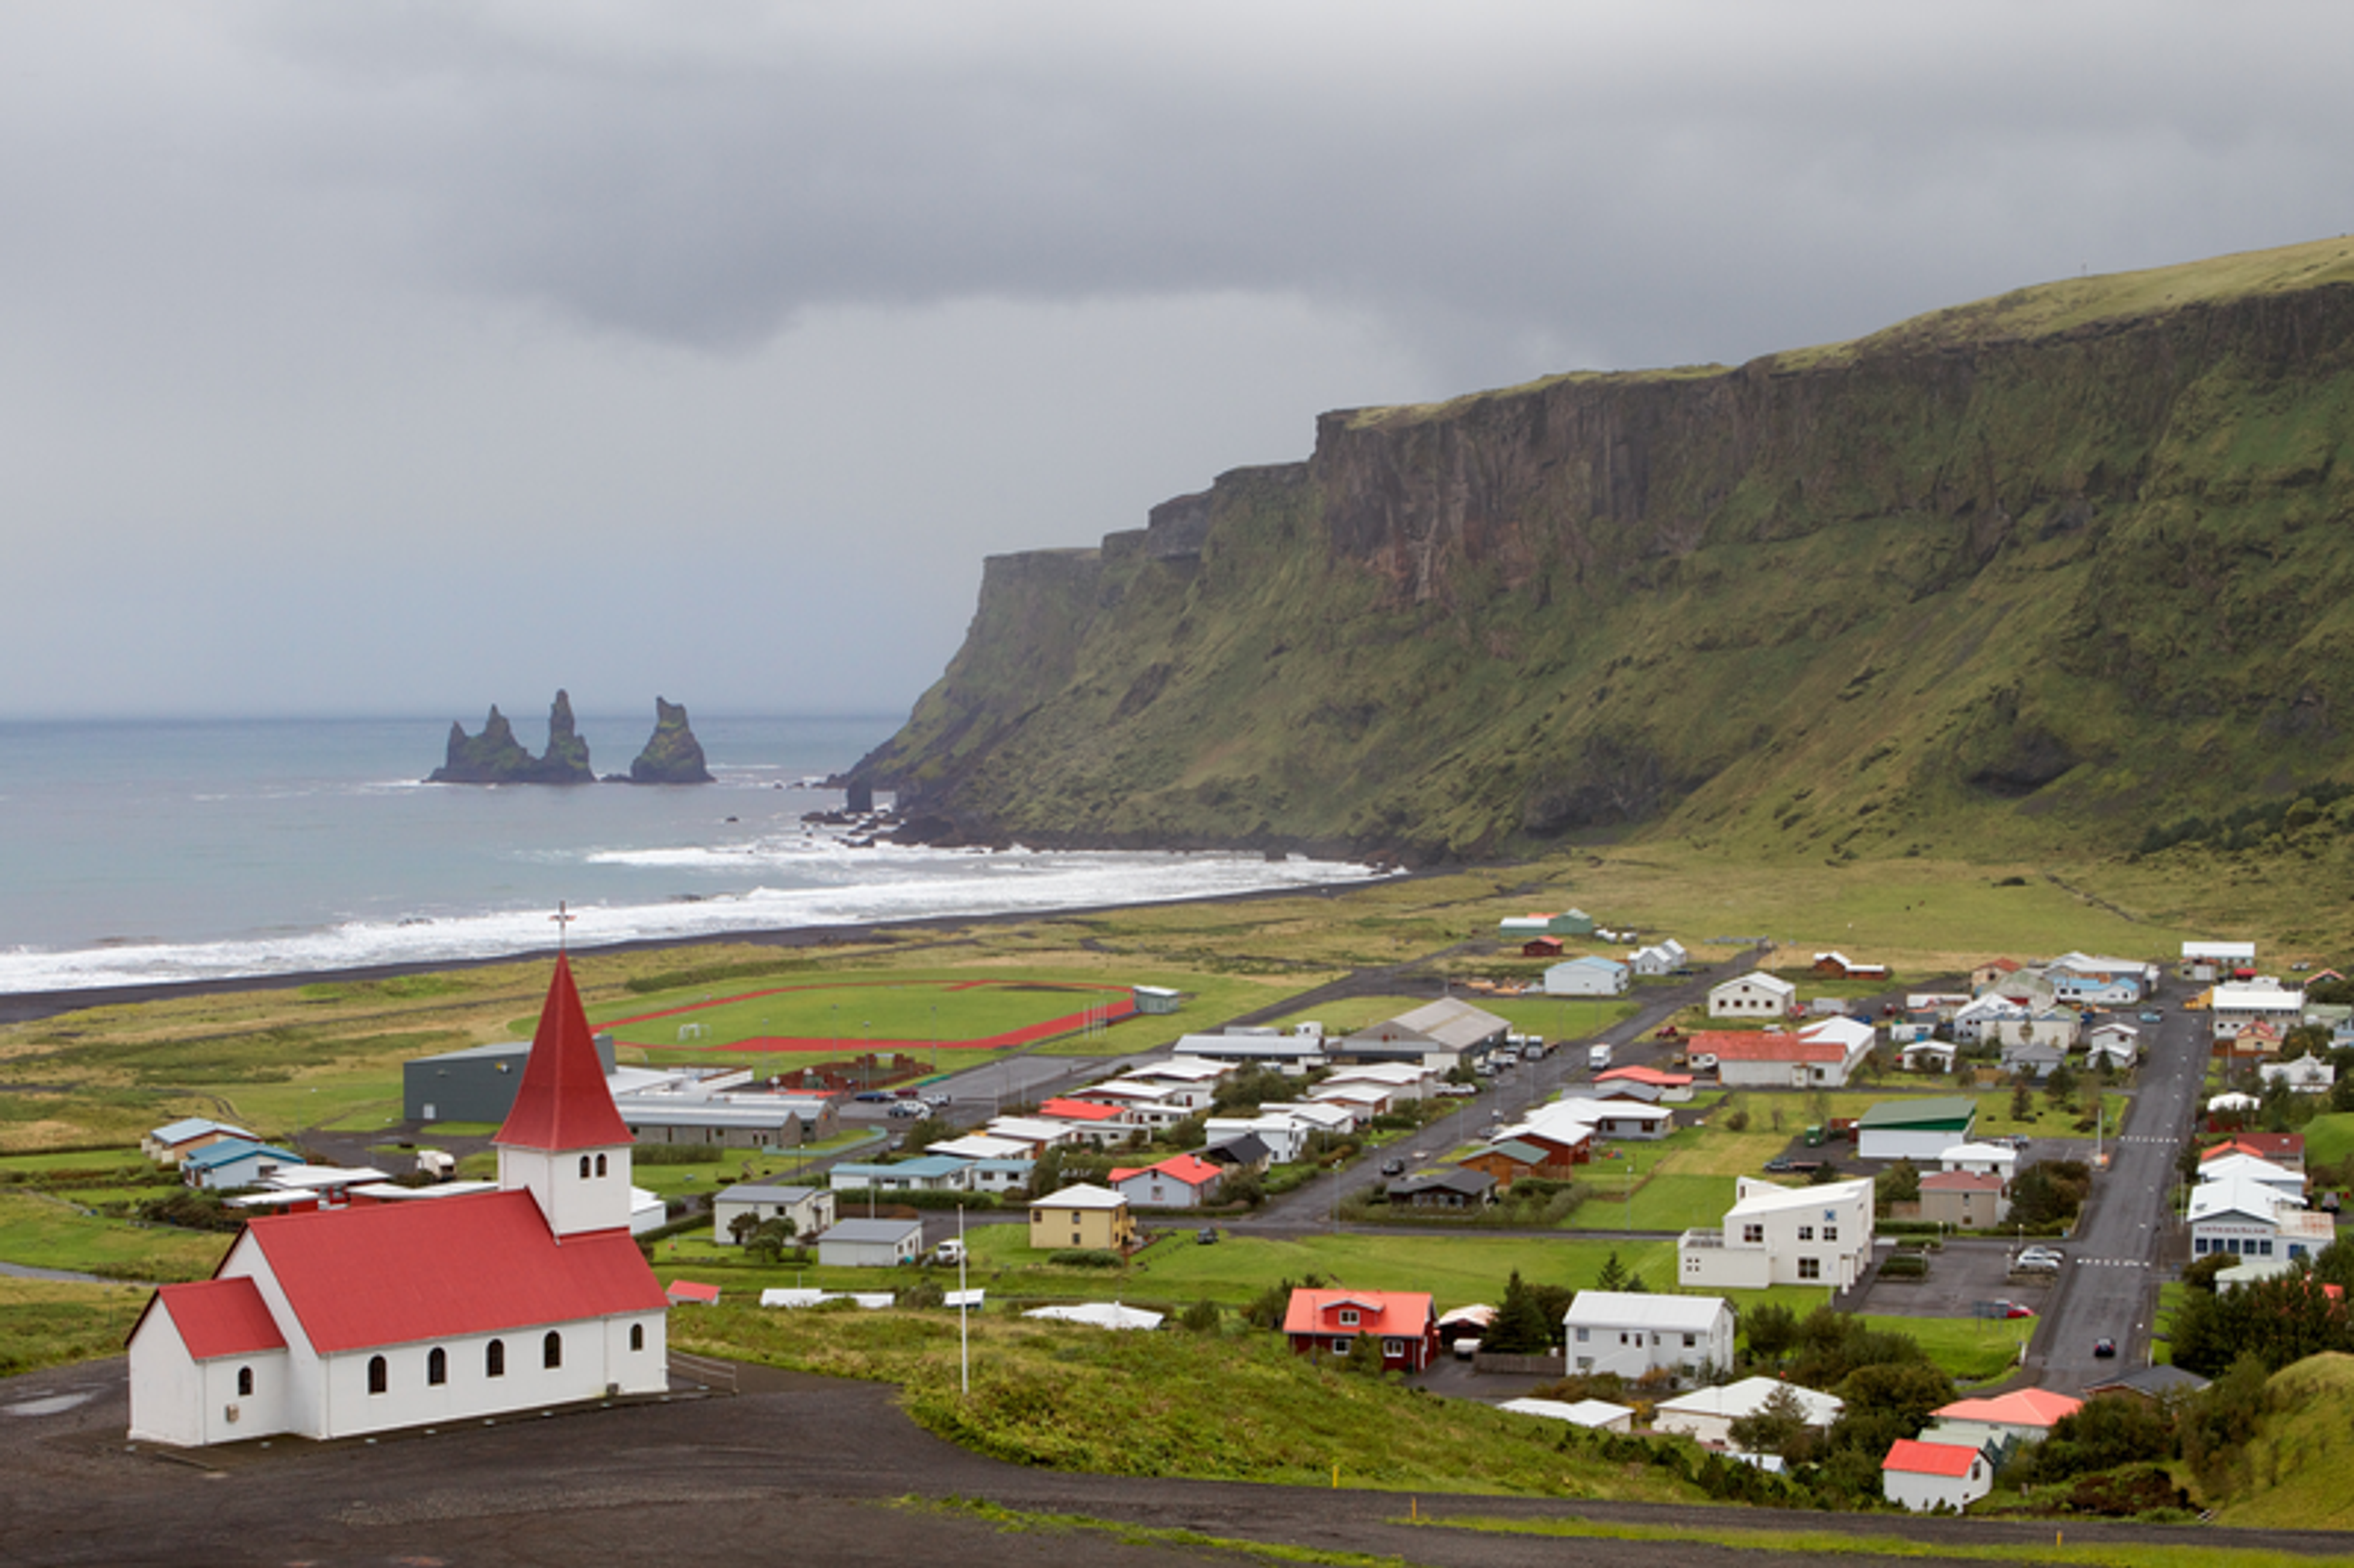 A view over the town of Vík with a church on the foreground.